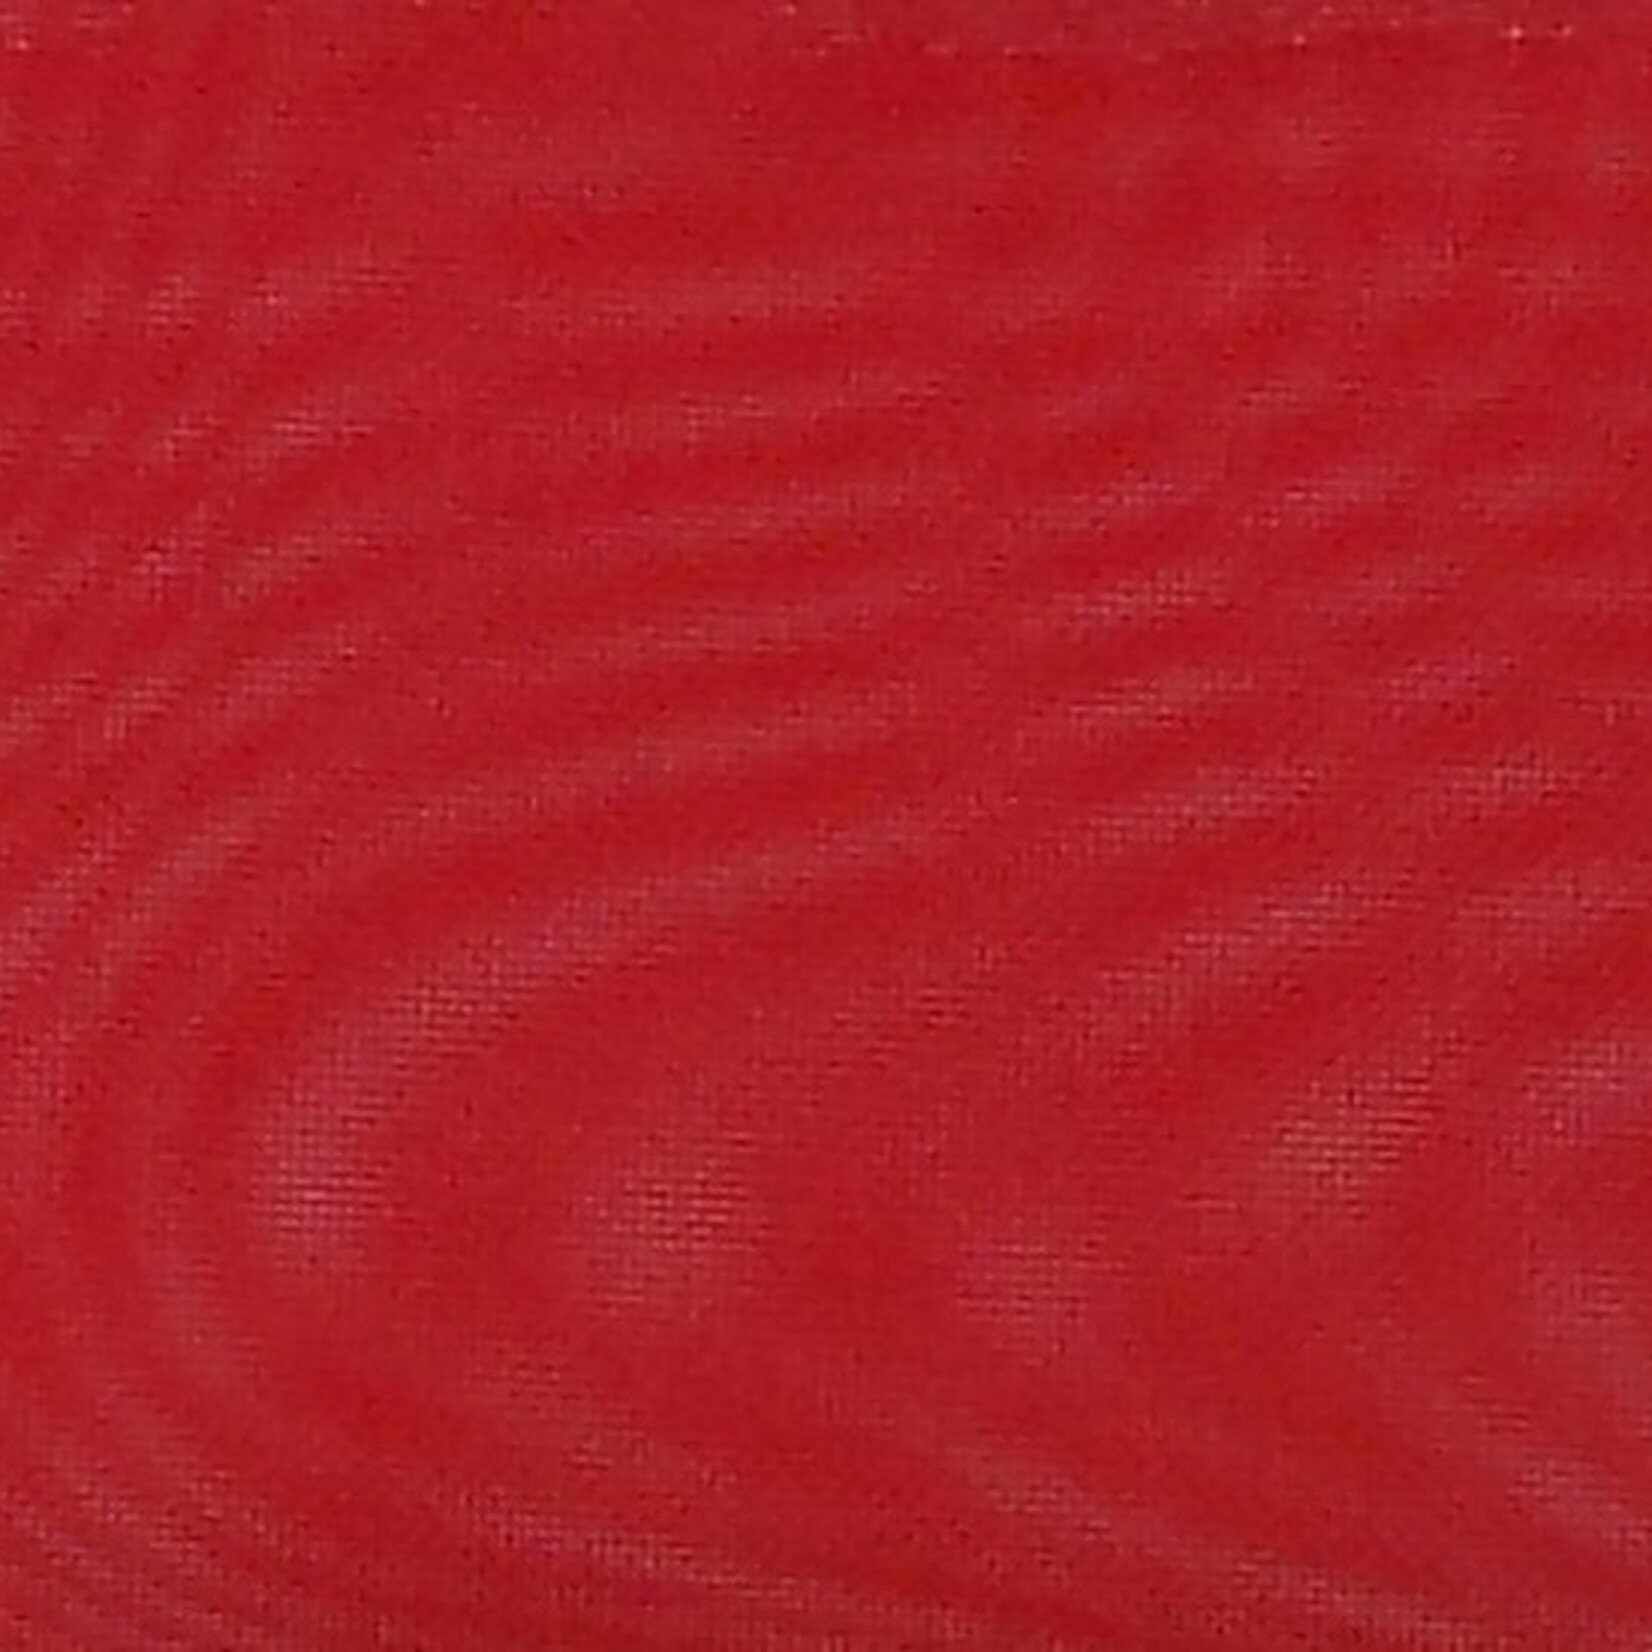 Nylon Sheer 108 Inches Red